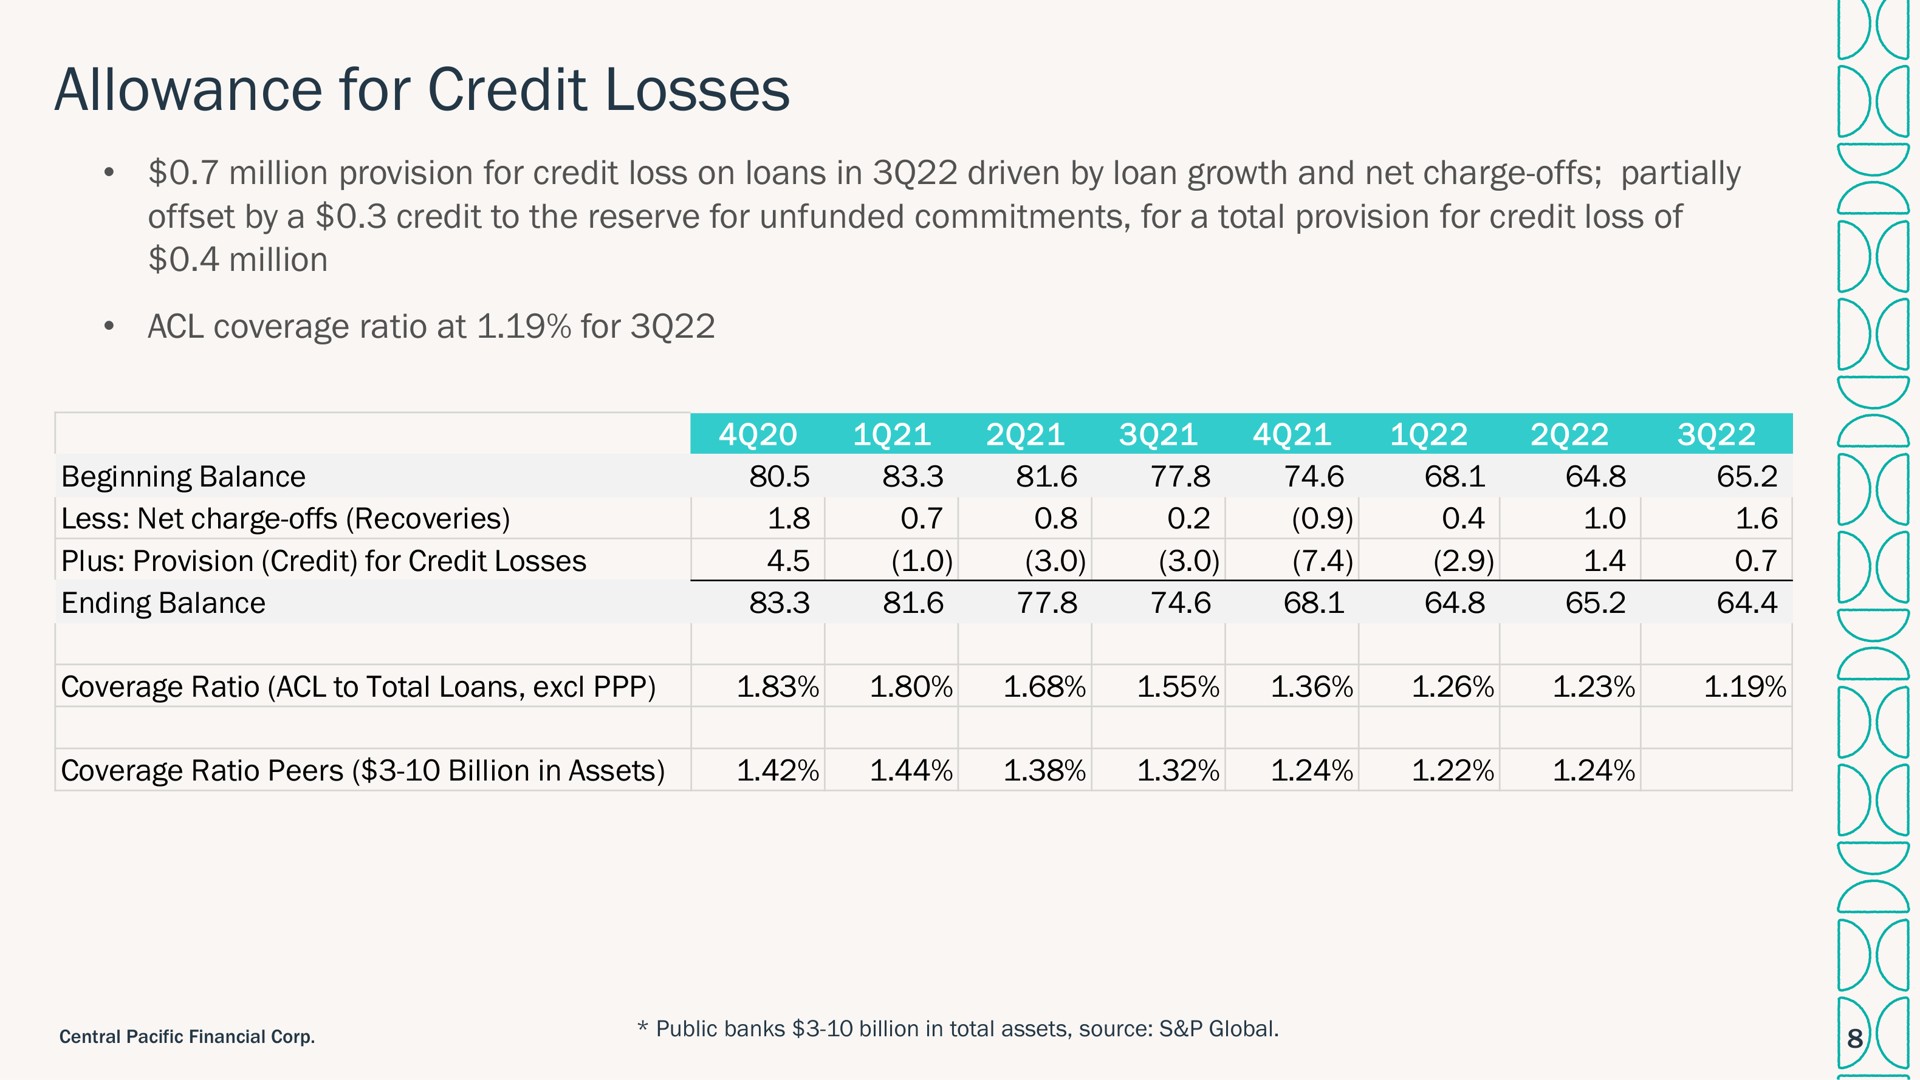 allowance for credit losses a i i i | Central Pacific Financial